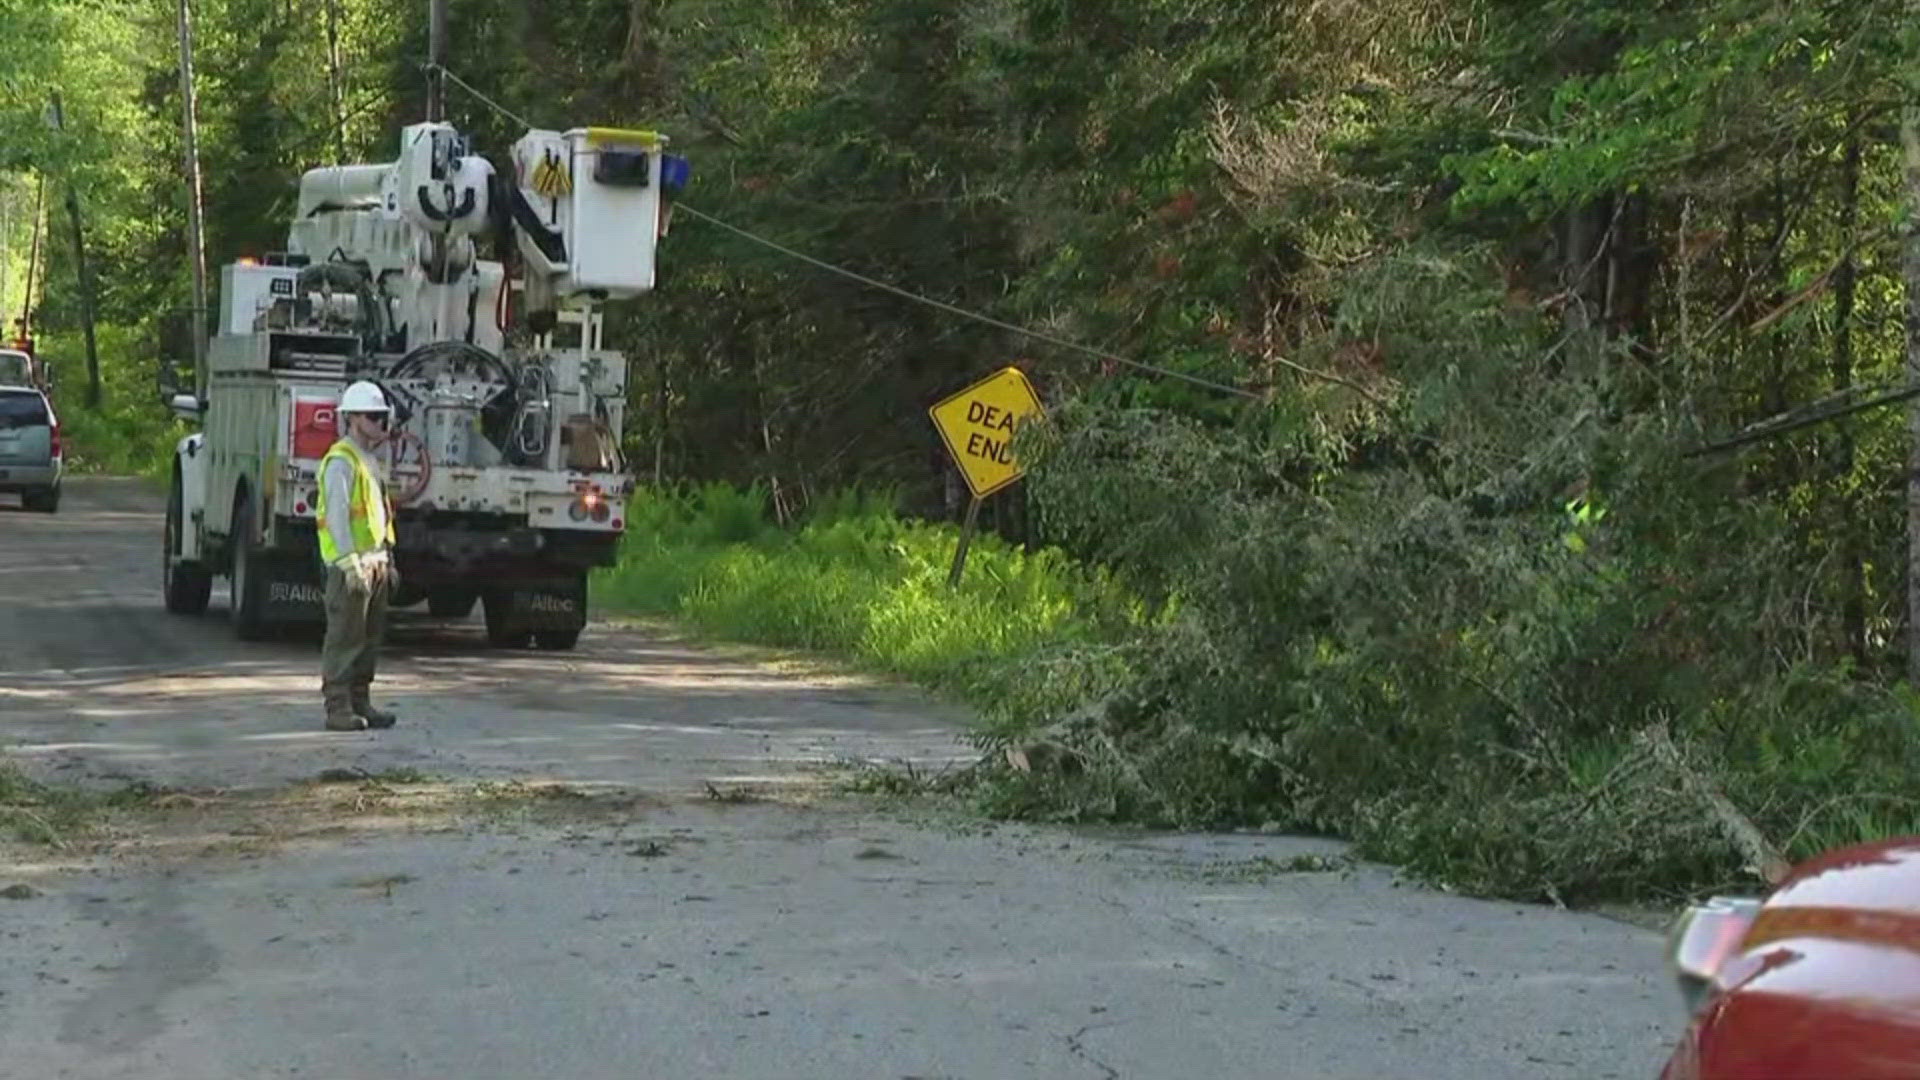 NEWS CENTER Maine meteorologist Jason Nappi is in Chesterville, where the storm caused some damage.